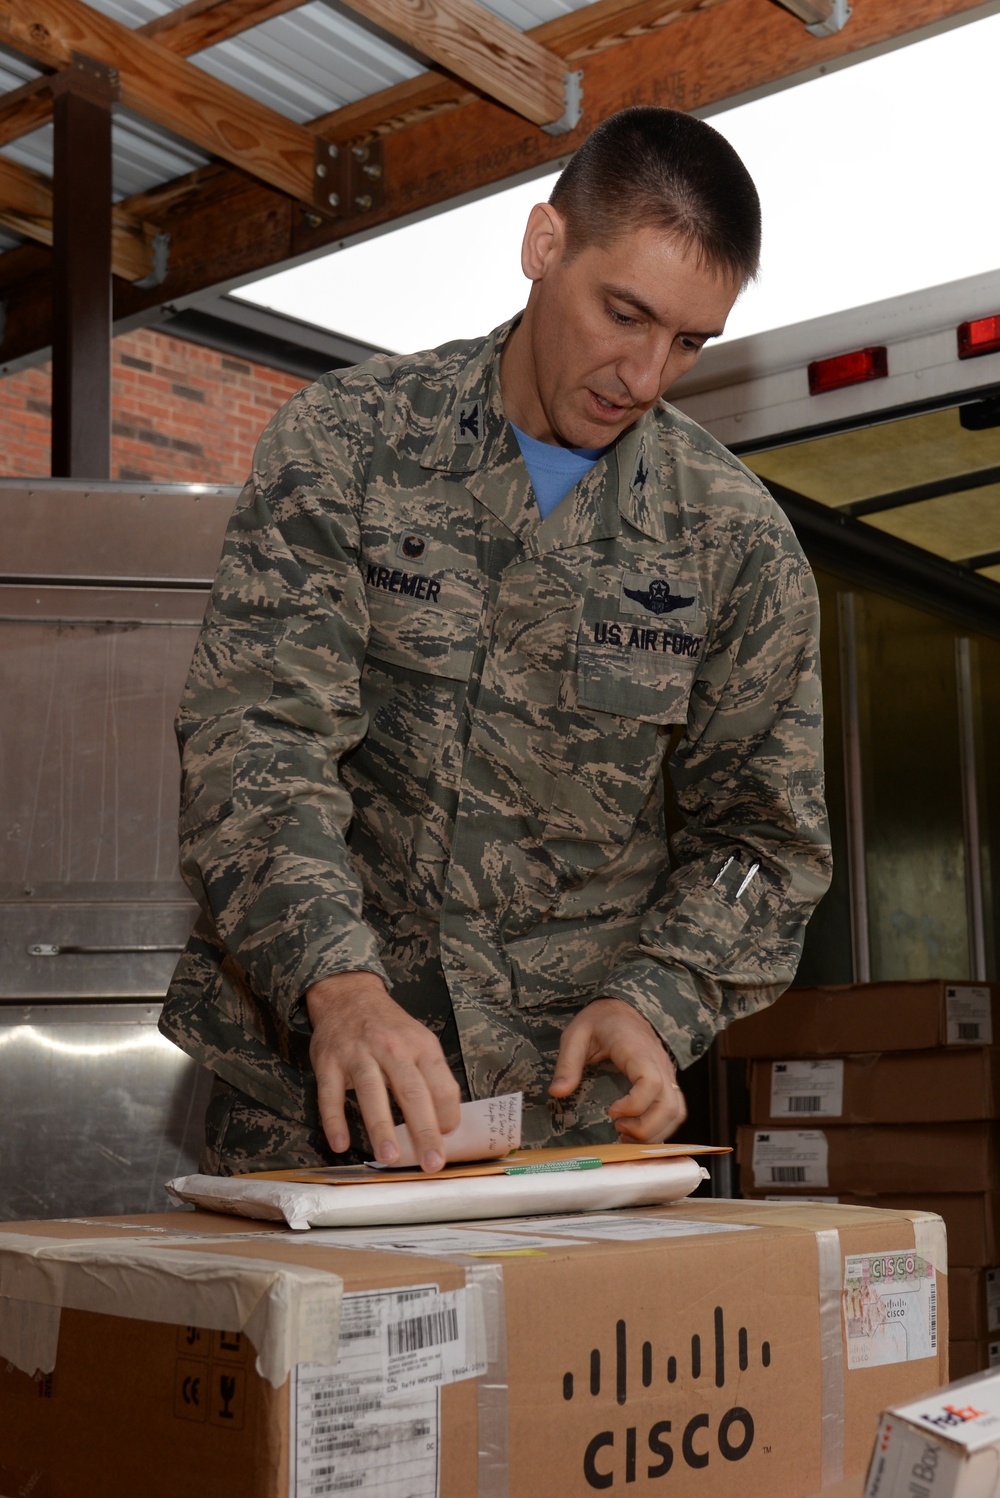 375th Air Mobility Wing commander visits the Official Mail Center